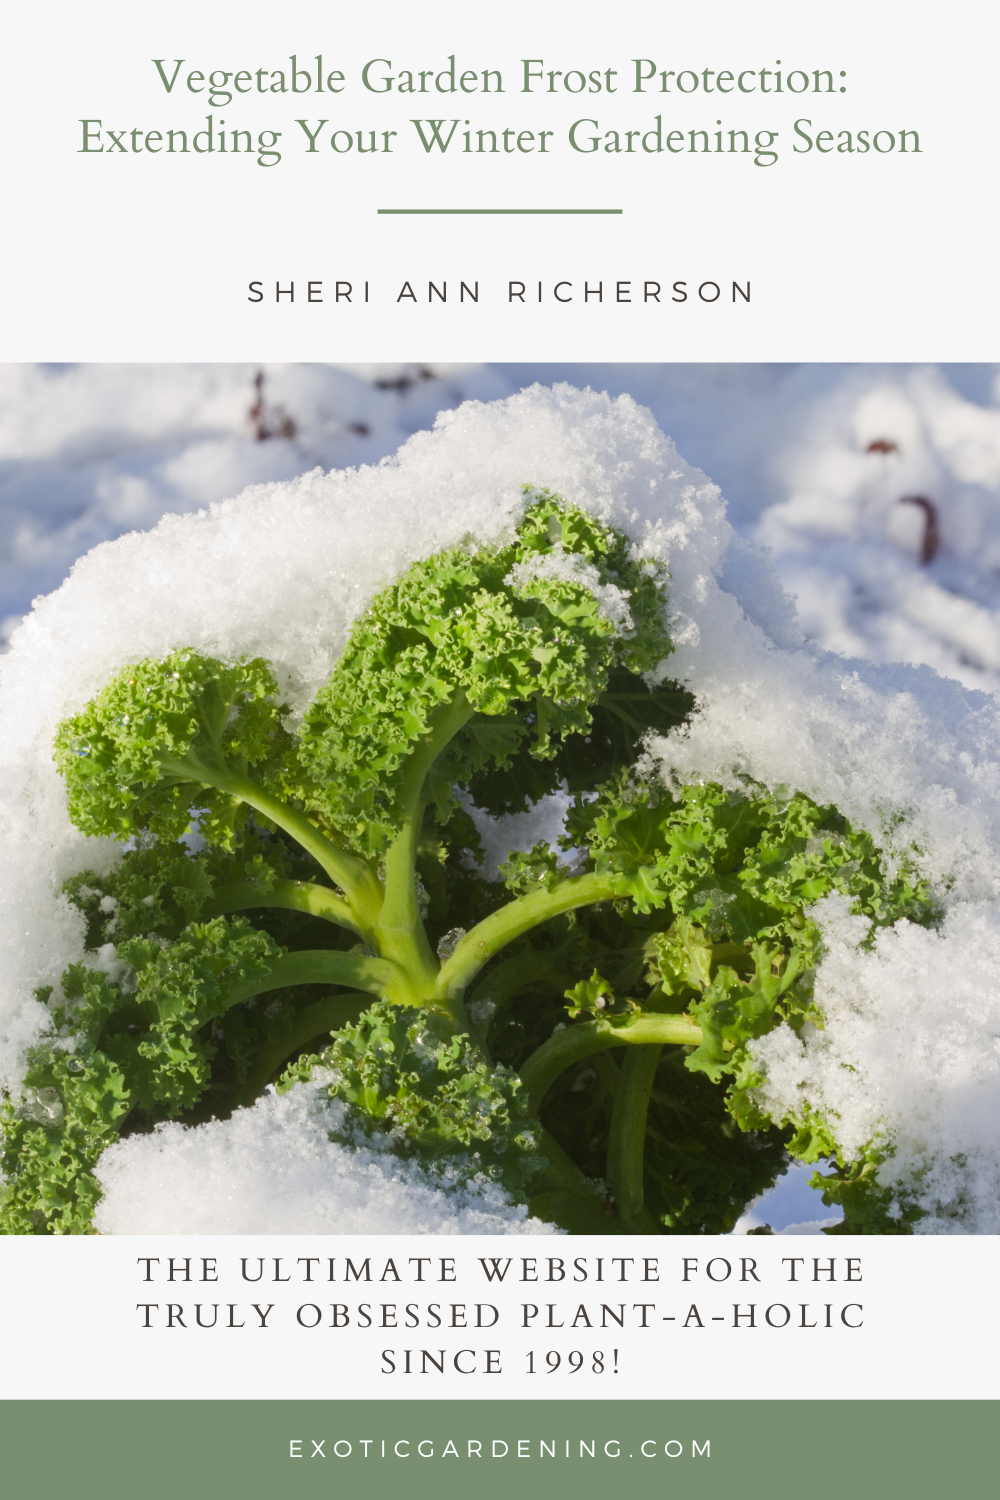 Kale in the snow.